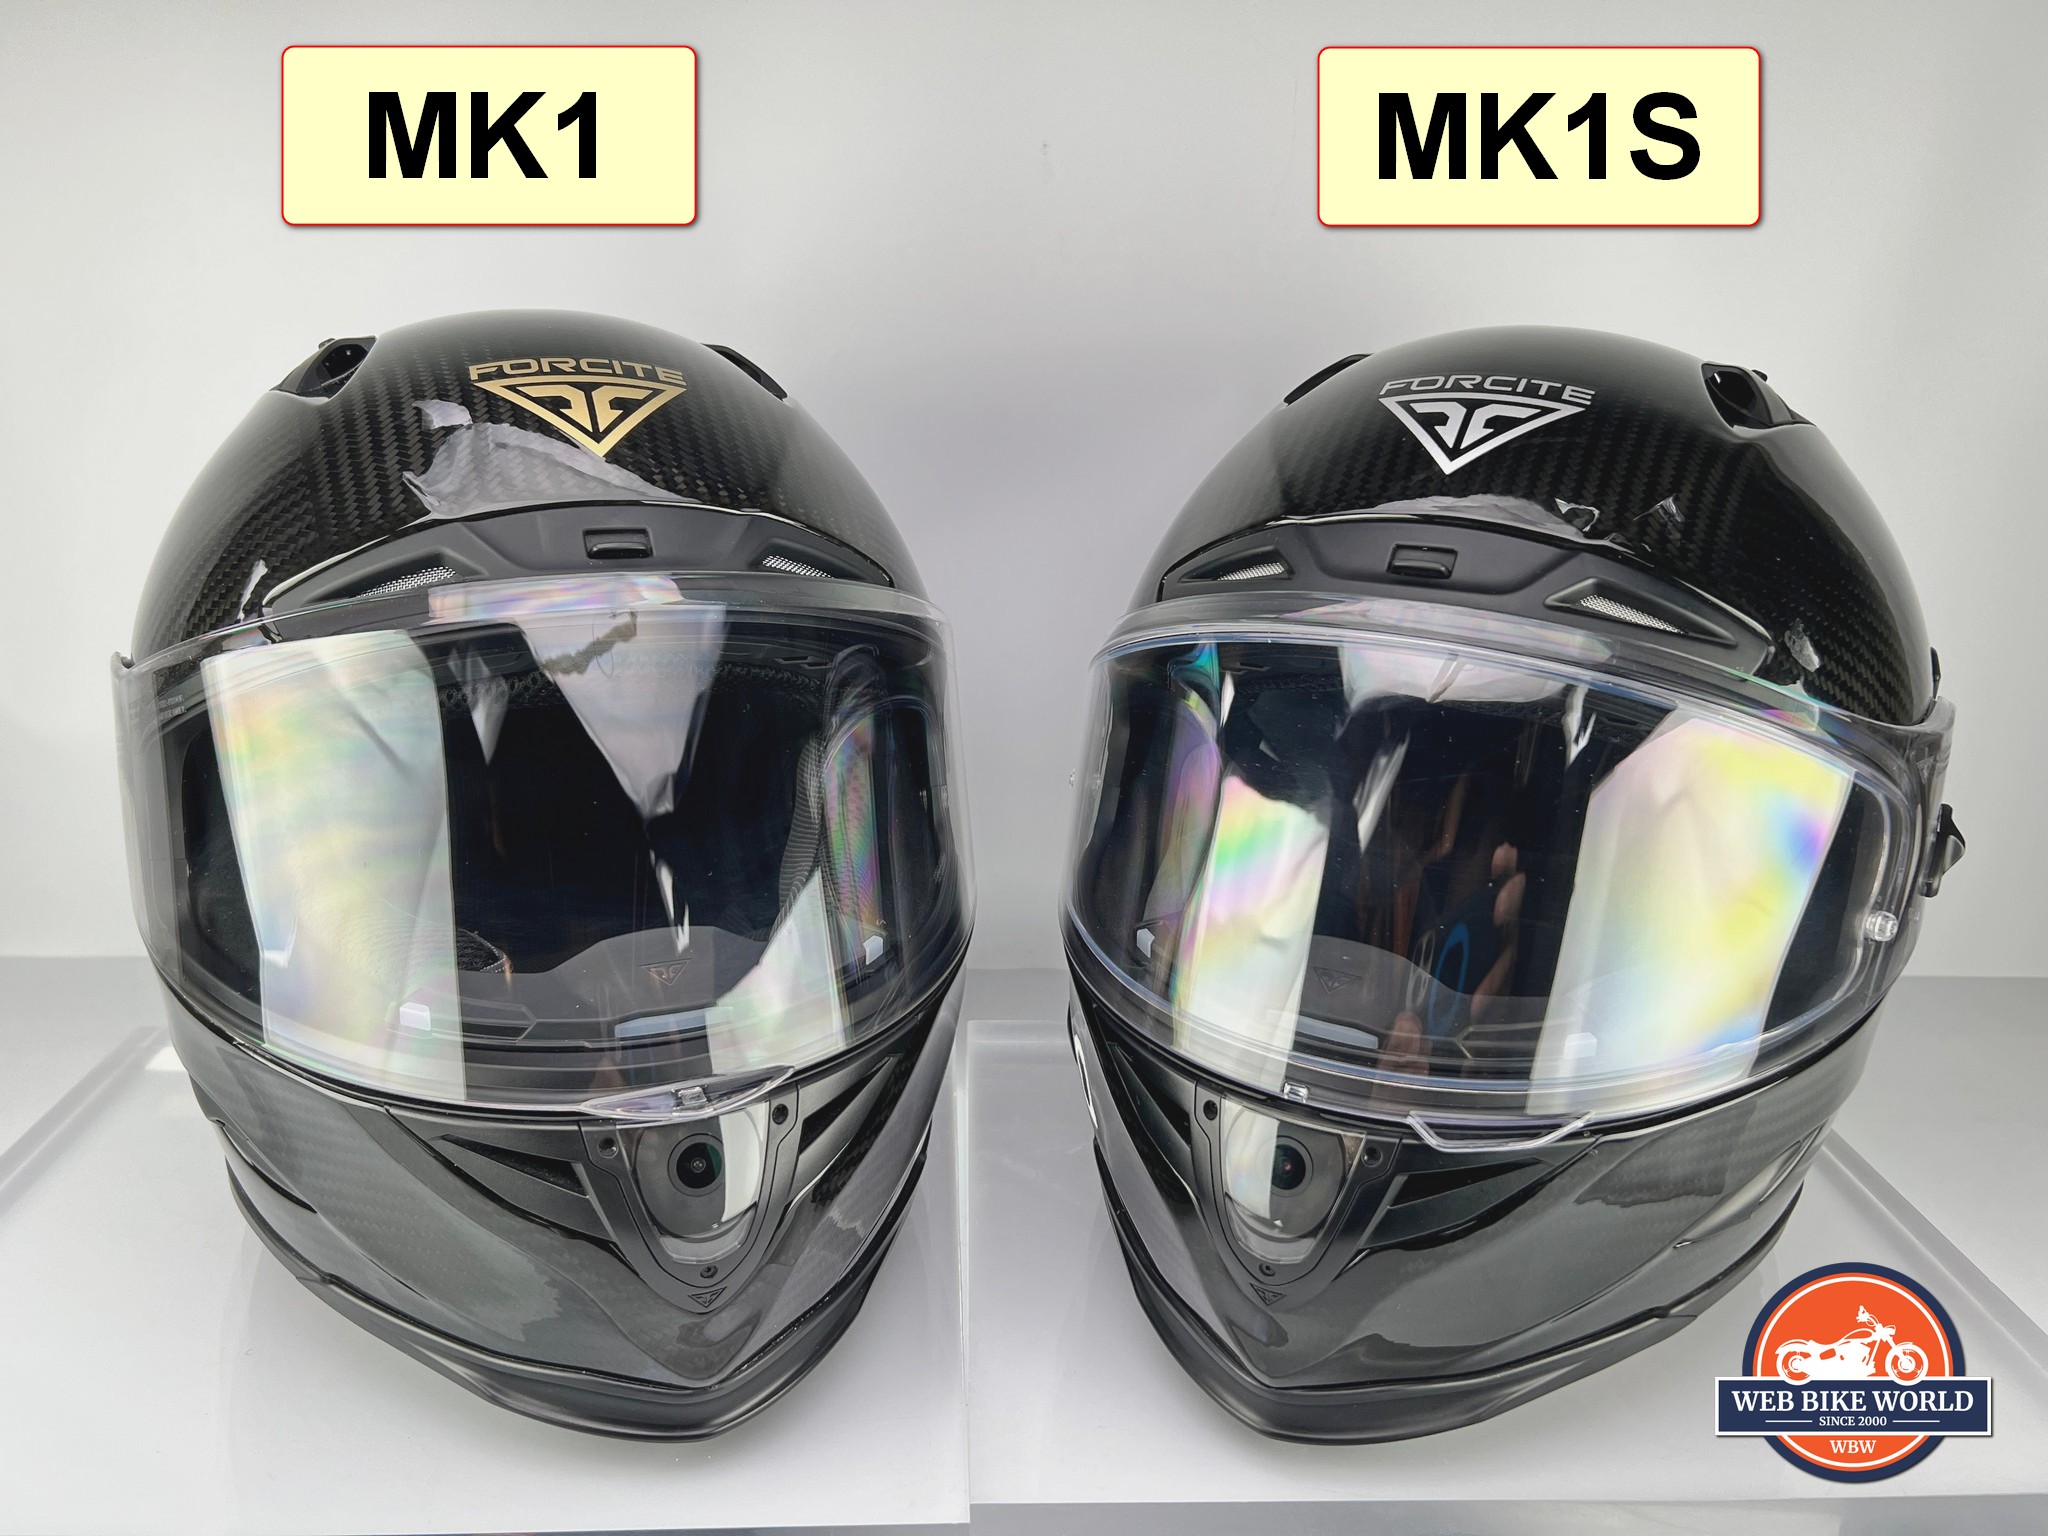 The original MK1 (left) and the new MK1S on the right.